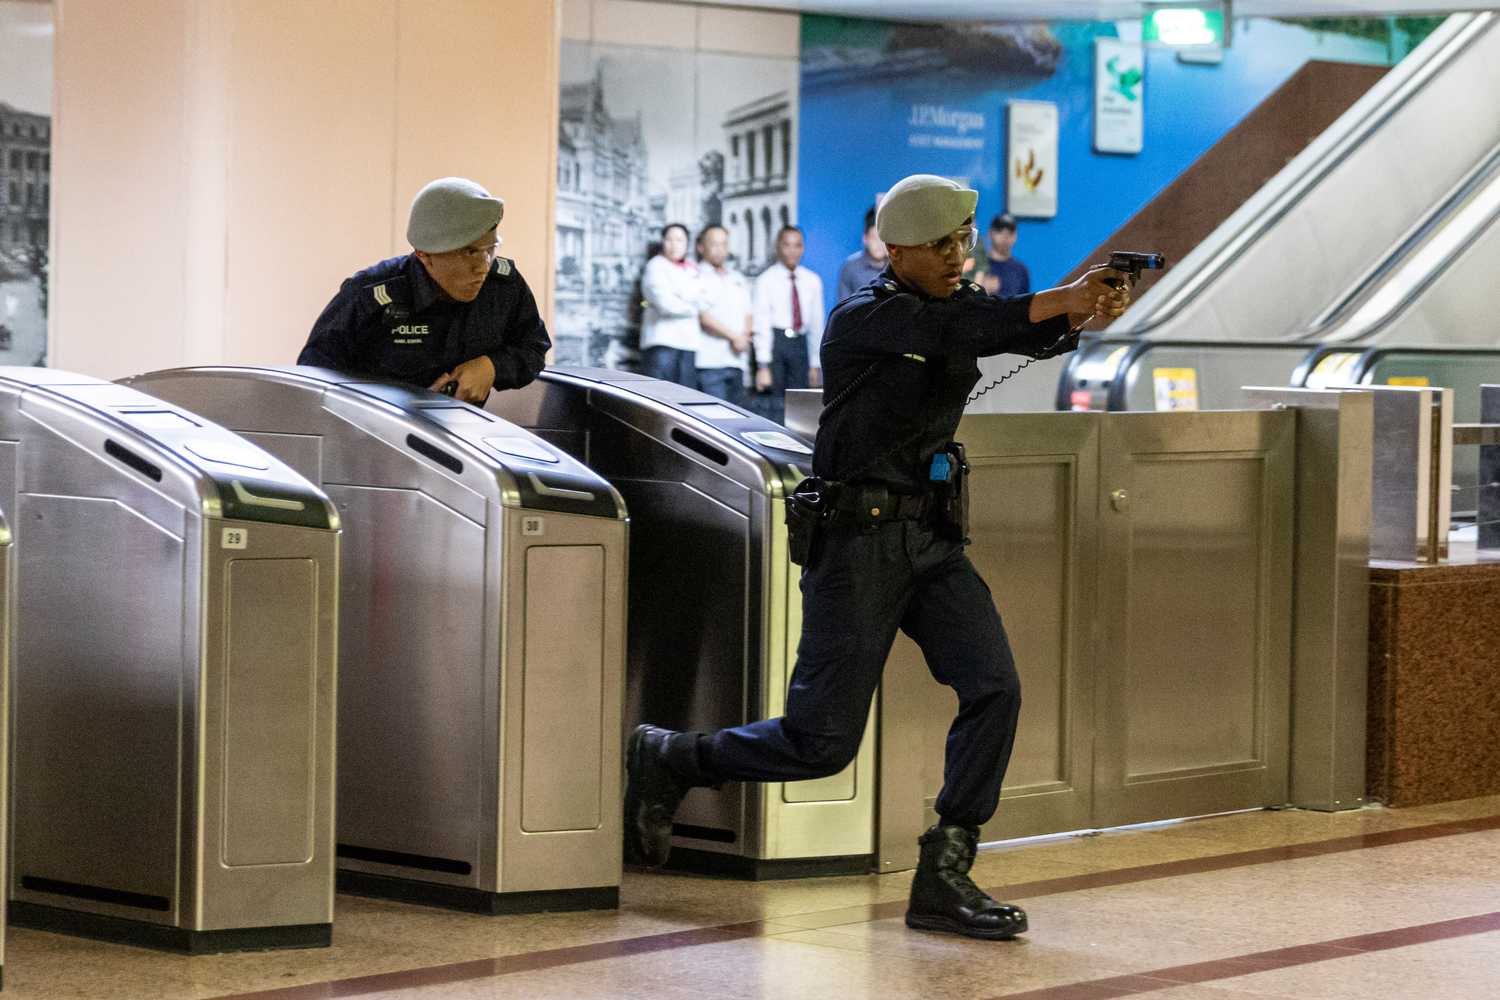 transcom officers dashing through the gantry with their guns pointed up